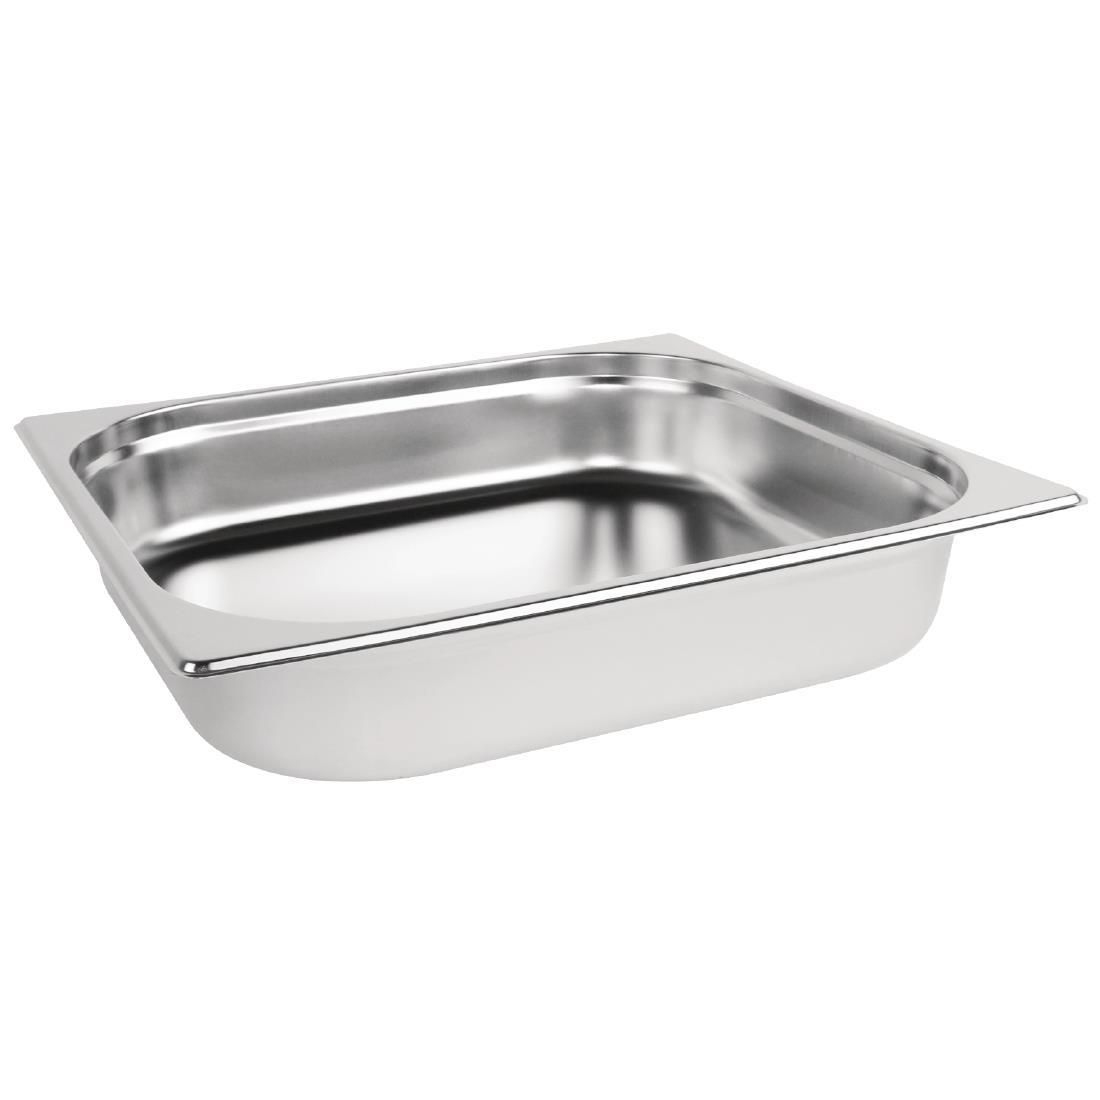 Vogue Stainless Steel 2/3 Gastronorm Pan 65mm - K811  - 1